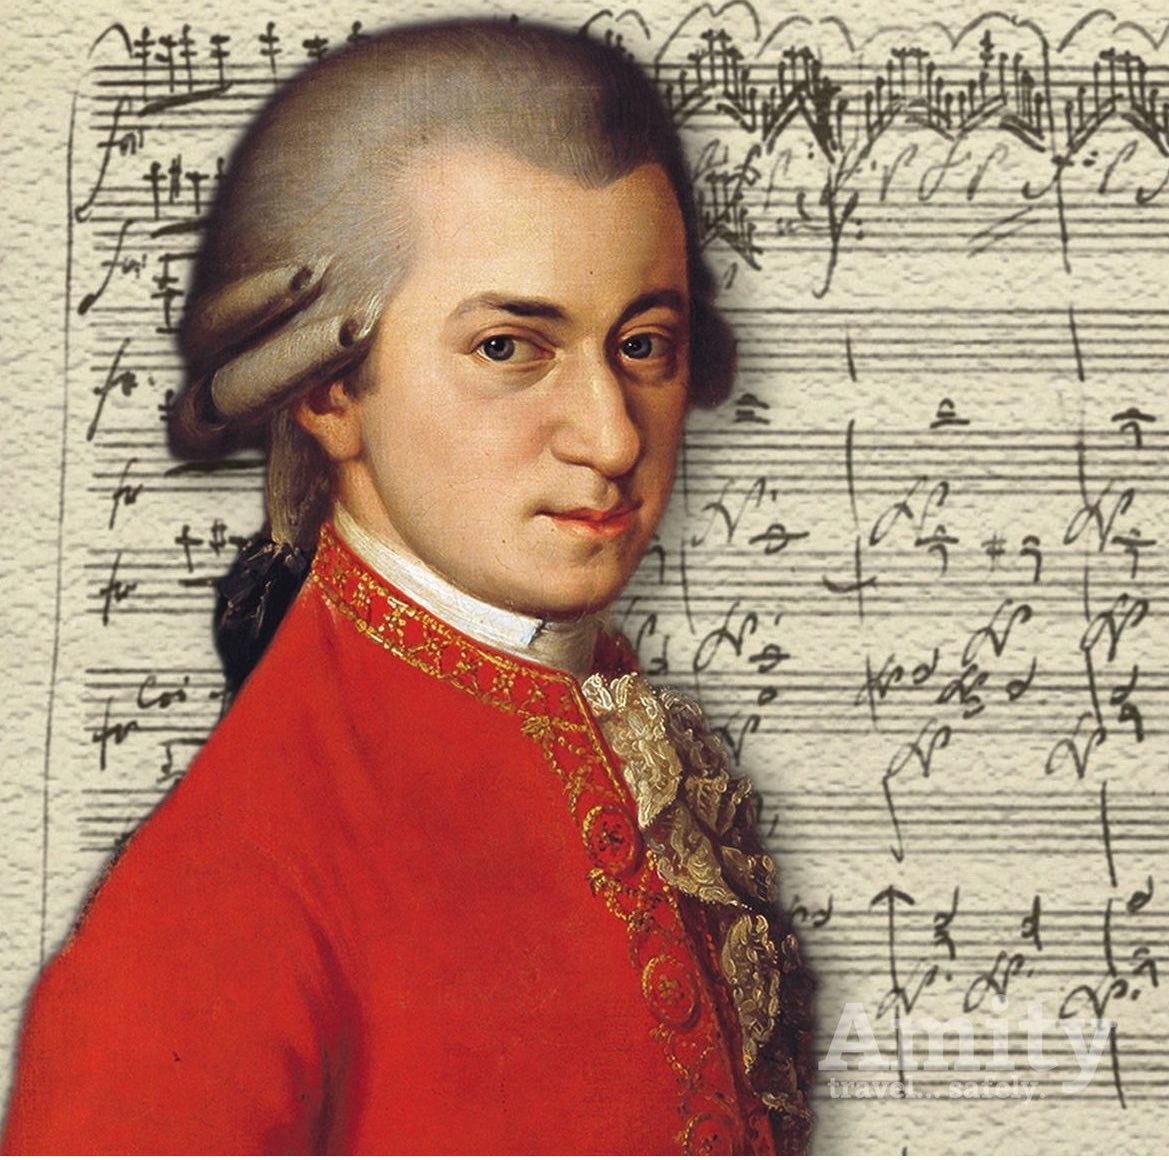 Did you know that famed composer Wolfgang Amadeus Mozart was a Freemason? On this day in 1785, at the age of 29, he was Raised to the Sublime Degree of Master Mason.